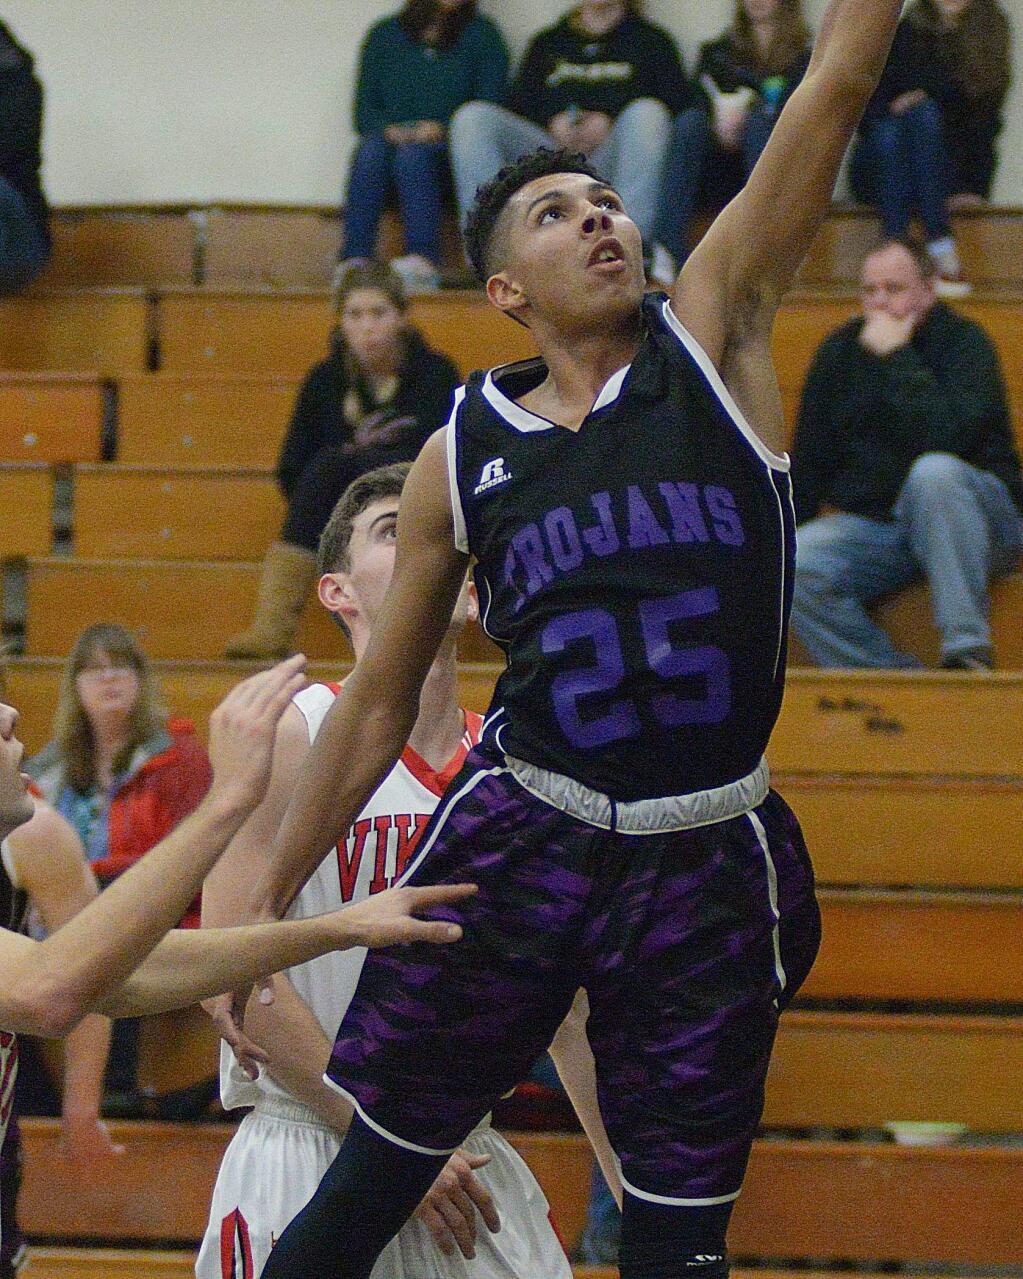 SUMNER FOWLER/FOR THE ARGUS-COURIERSenior Ryan Perez earned a spot on the All-Empire basketball team after leading Petaluma High to its best season in nearly a decade.